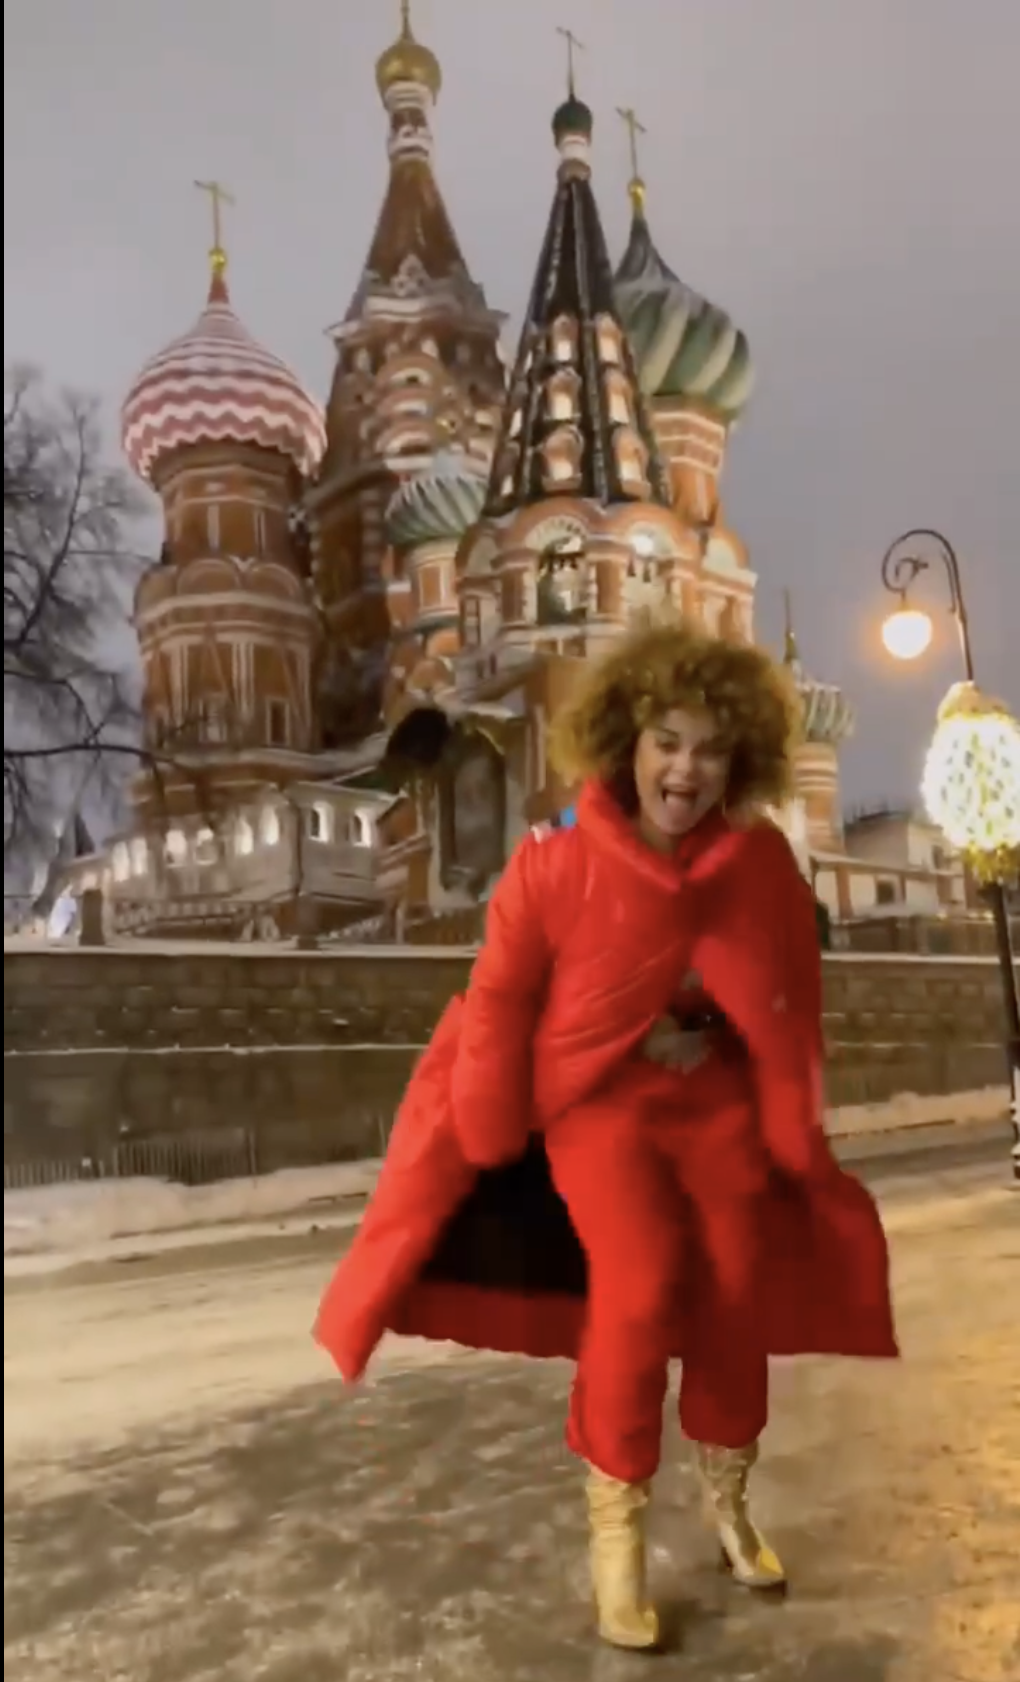 ''Oh, Natasha, made in Russia'': Ex-Kyvian Korolova breaks through the bottom, dancing to her new song about Russia against the Kremlin backdrop